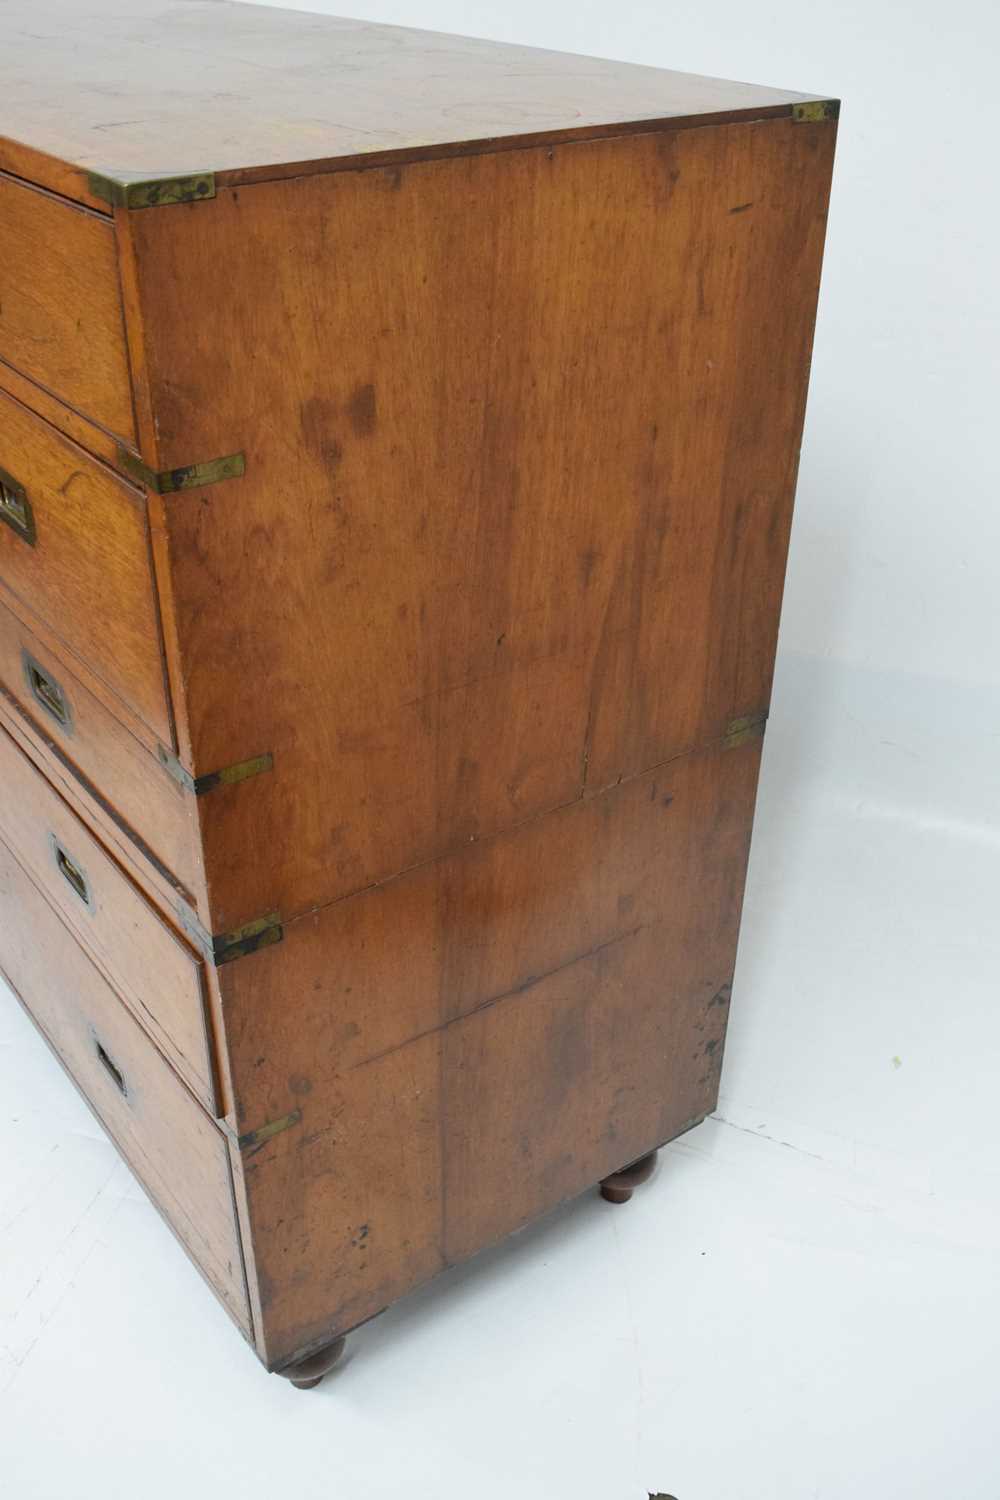 Late 19th century brass-bound teak campaign secretaire chest - Image 9 of 16